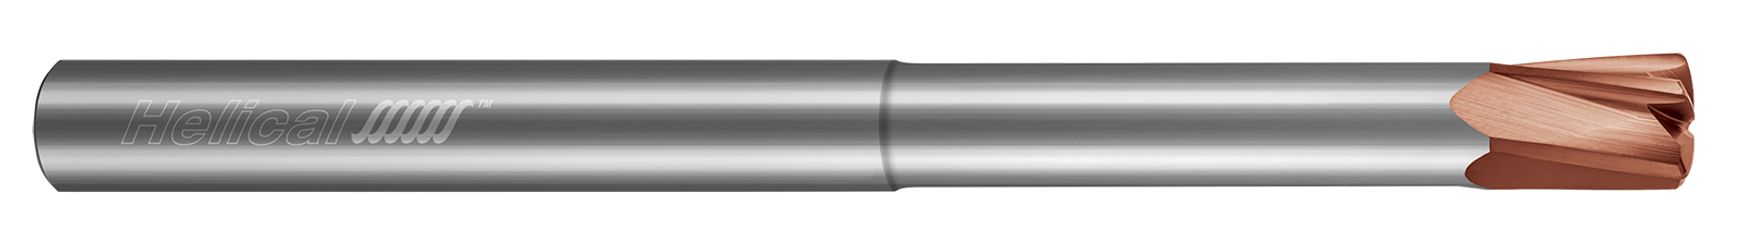 High Feed End Mills-Steels up to 45 Rc-Metric-Variable Pitch-Reduced Neck